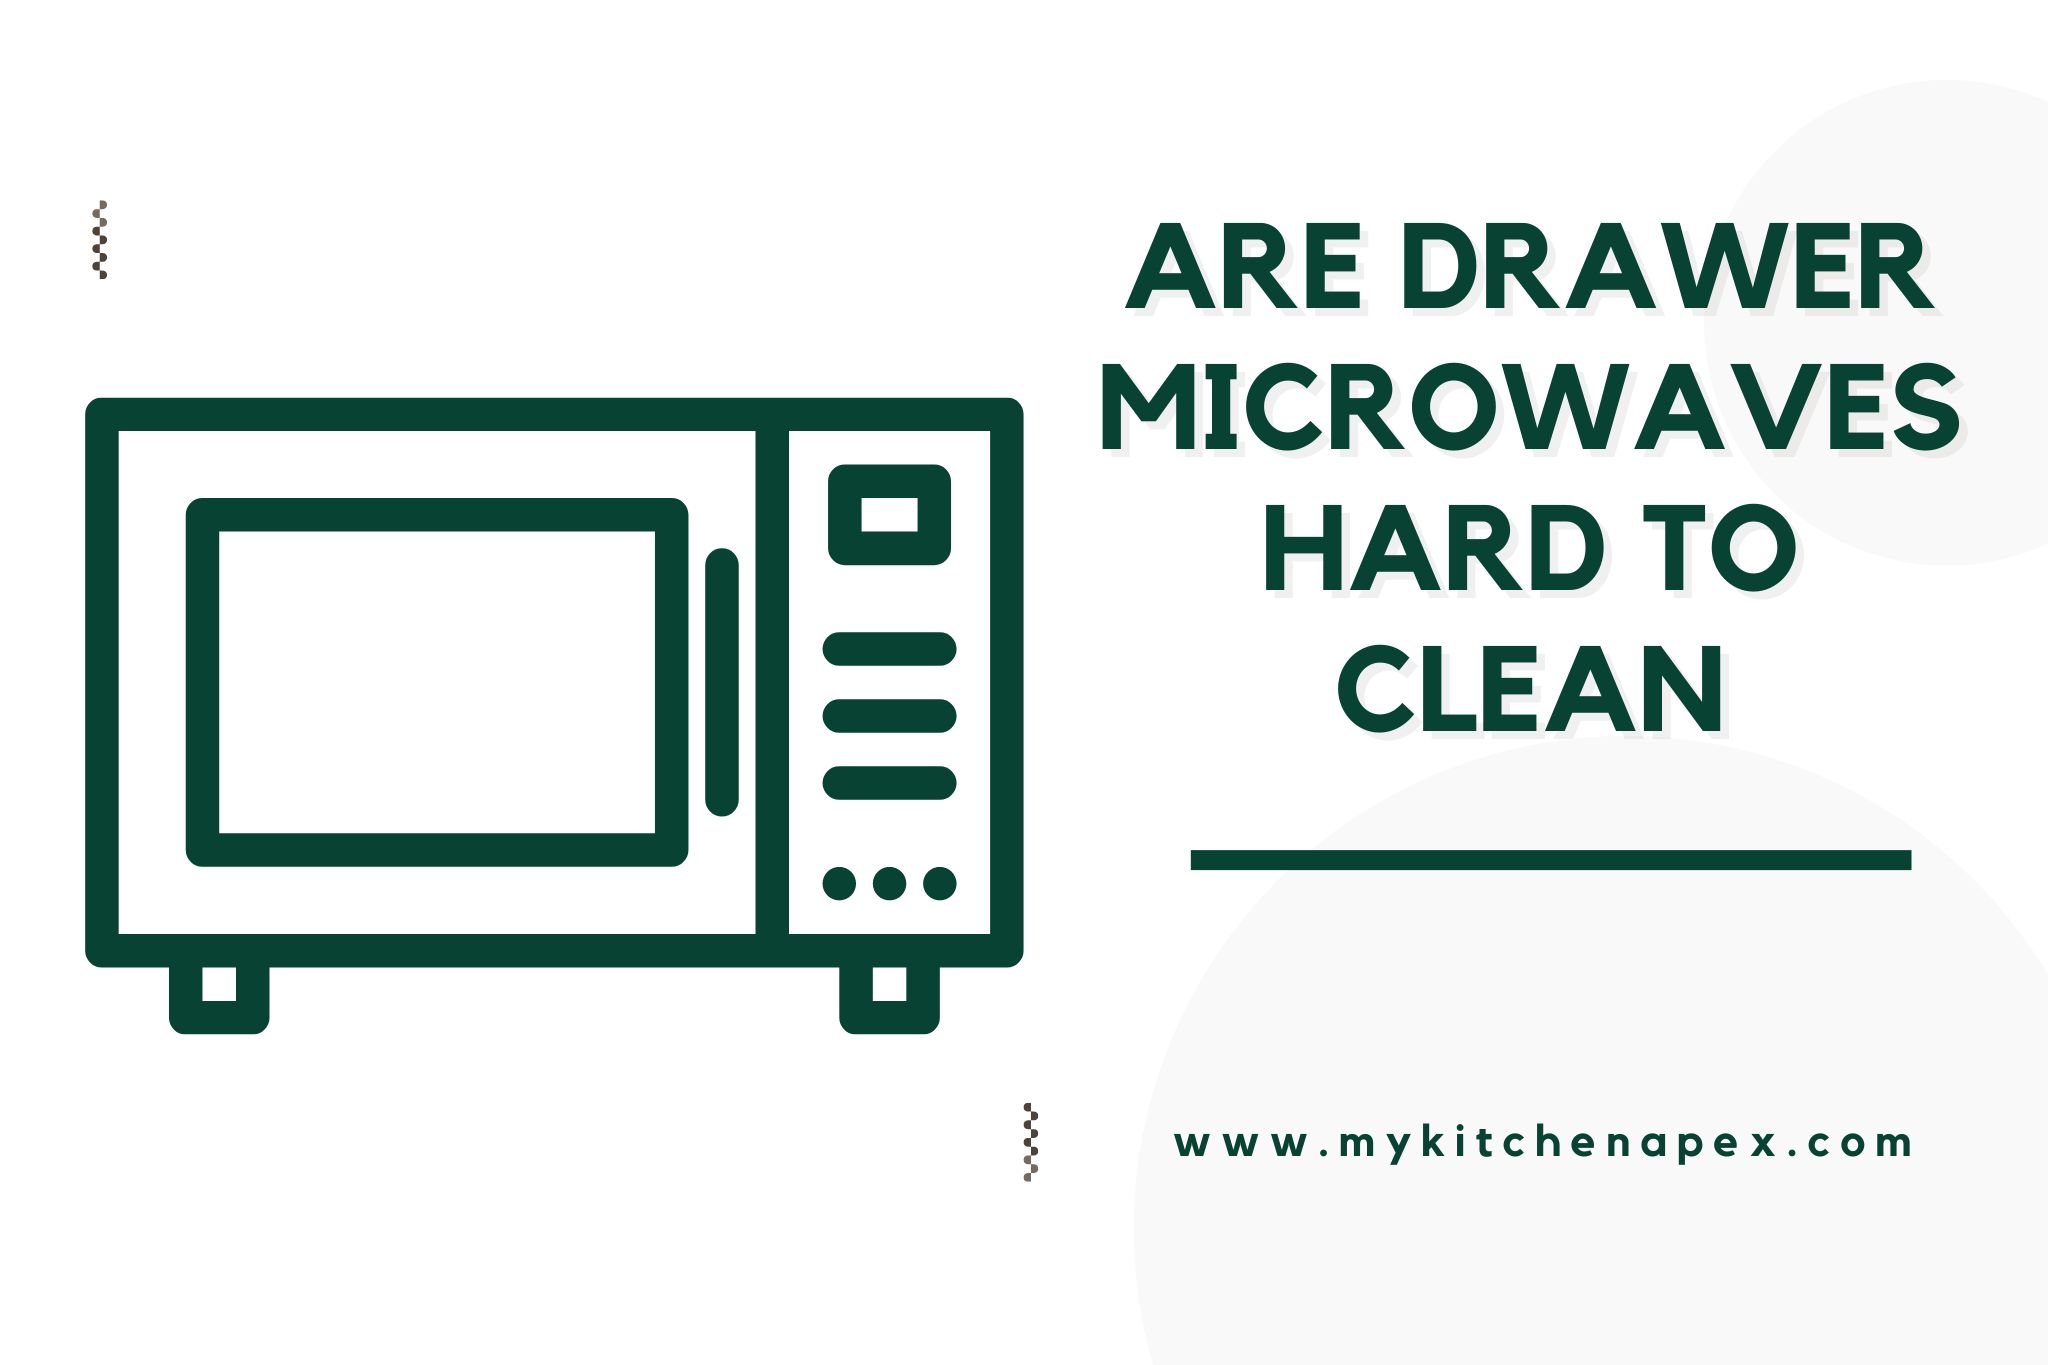 are drawer microwaves hard to clean